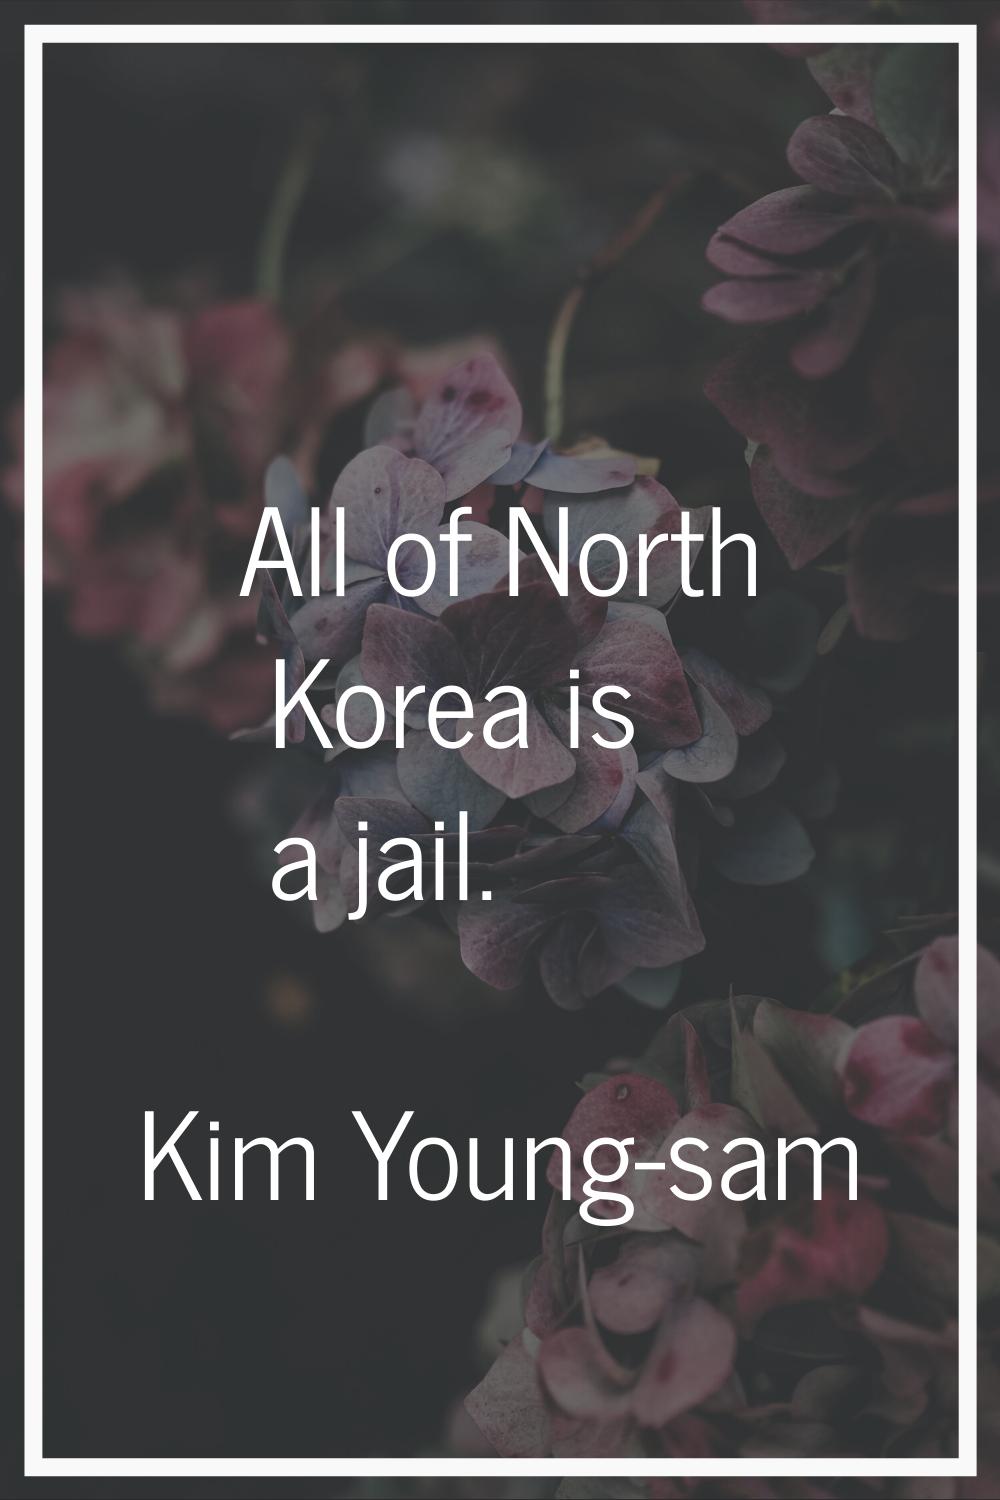 All of North Korea is a jail.